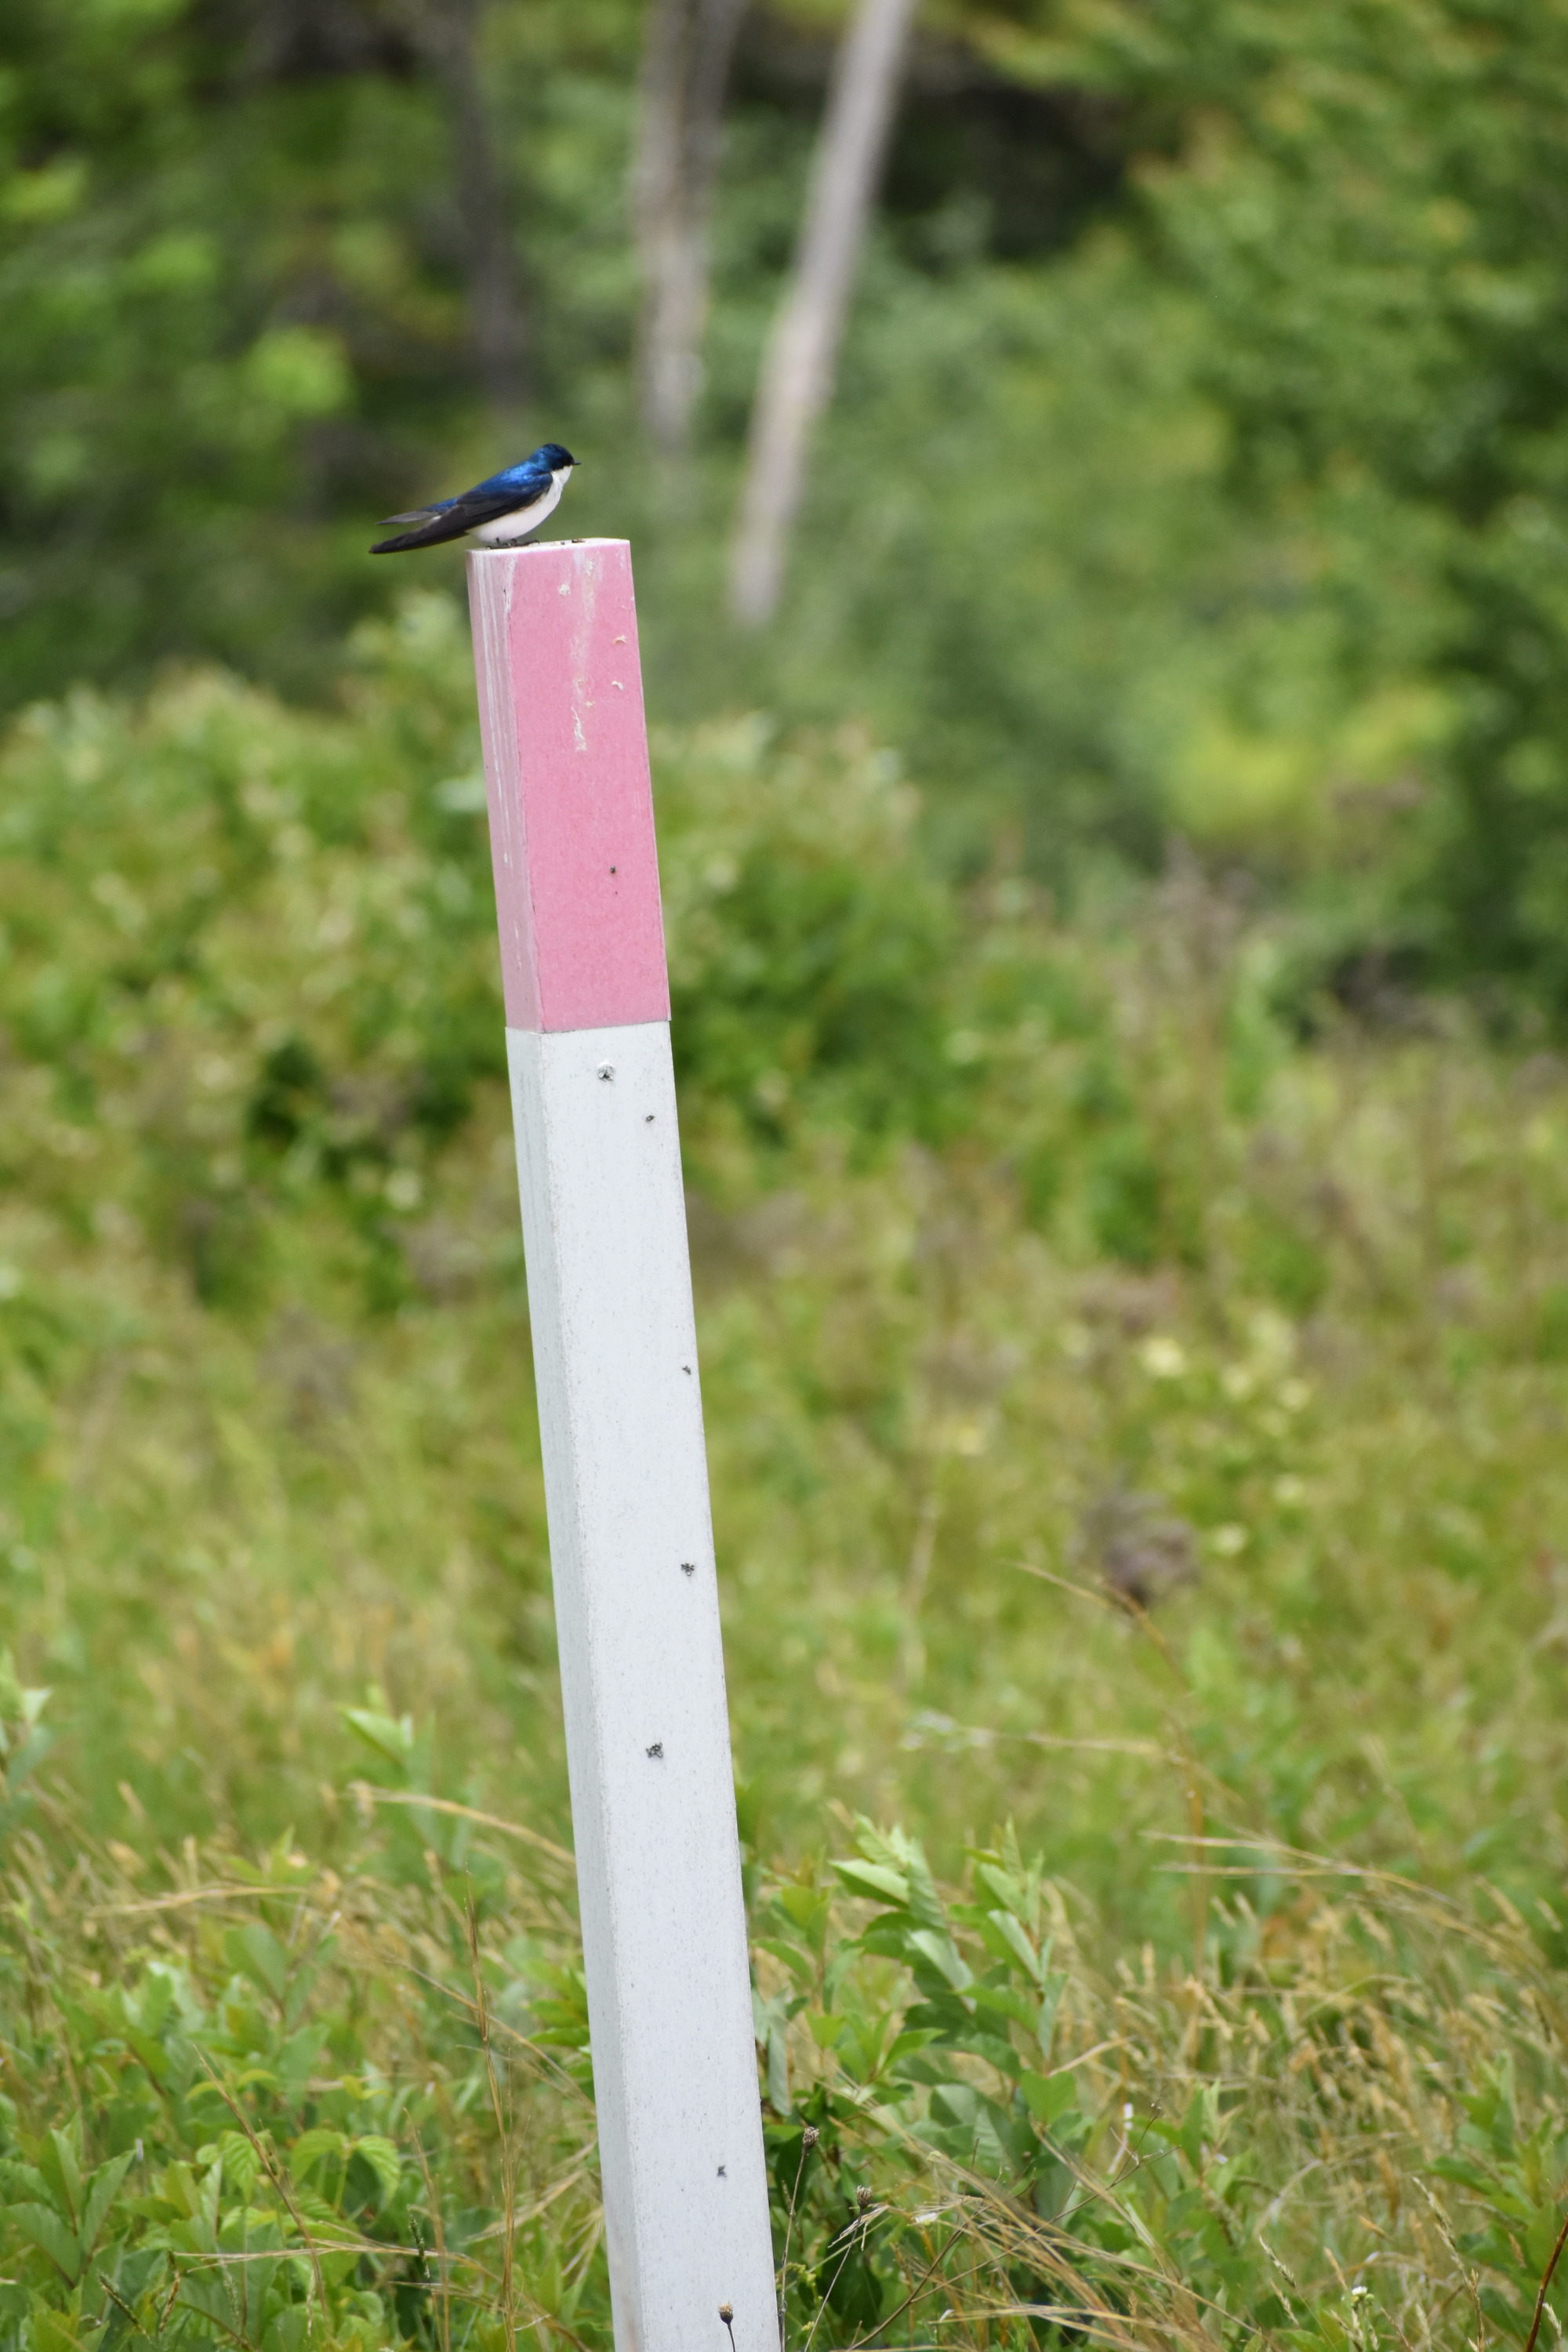 A tree swallow sits on a red and white post.